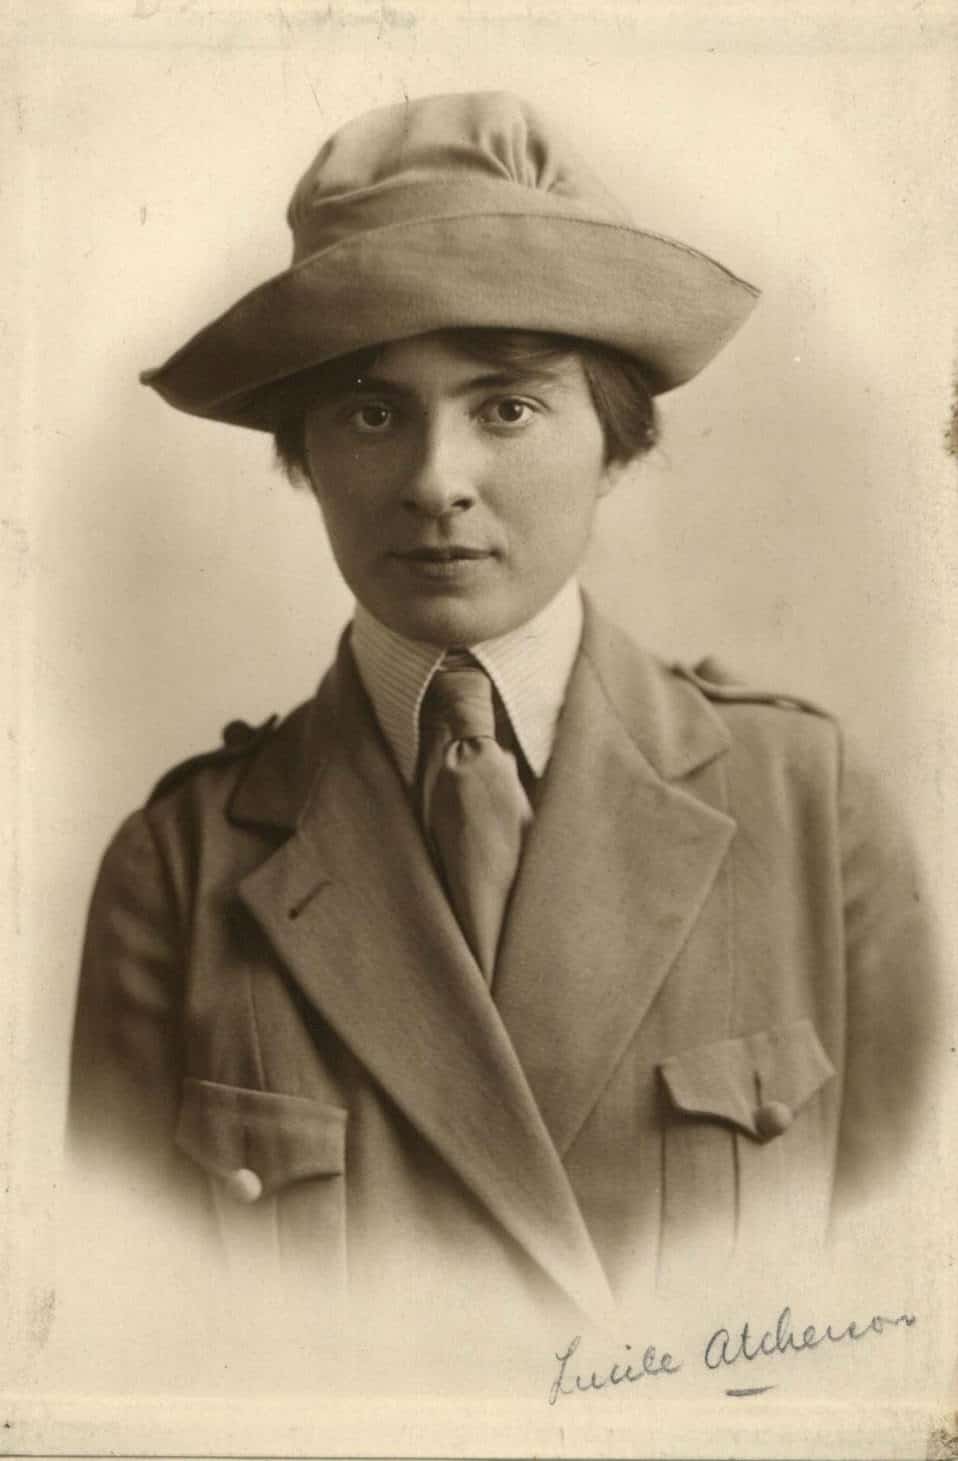 First Female American Foreign Service Officer -- Lucile Atcherson Curtis -- in 1922 (2014) US Department of State | Flickr Photostream